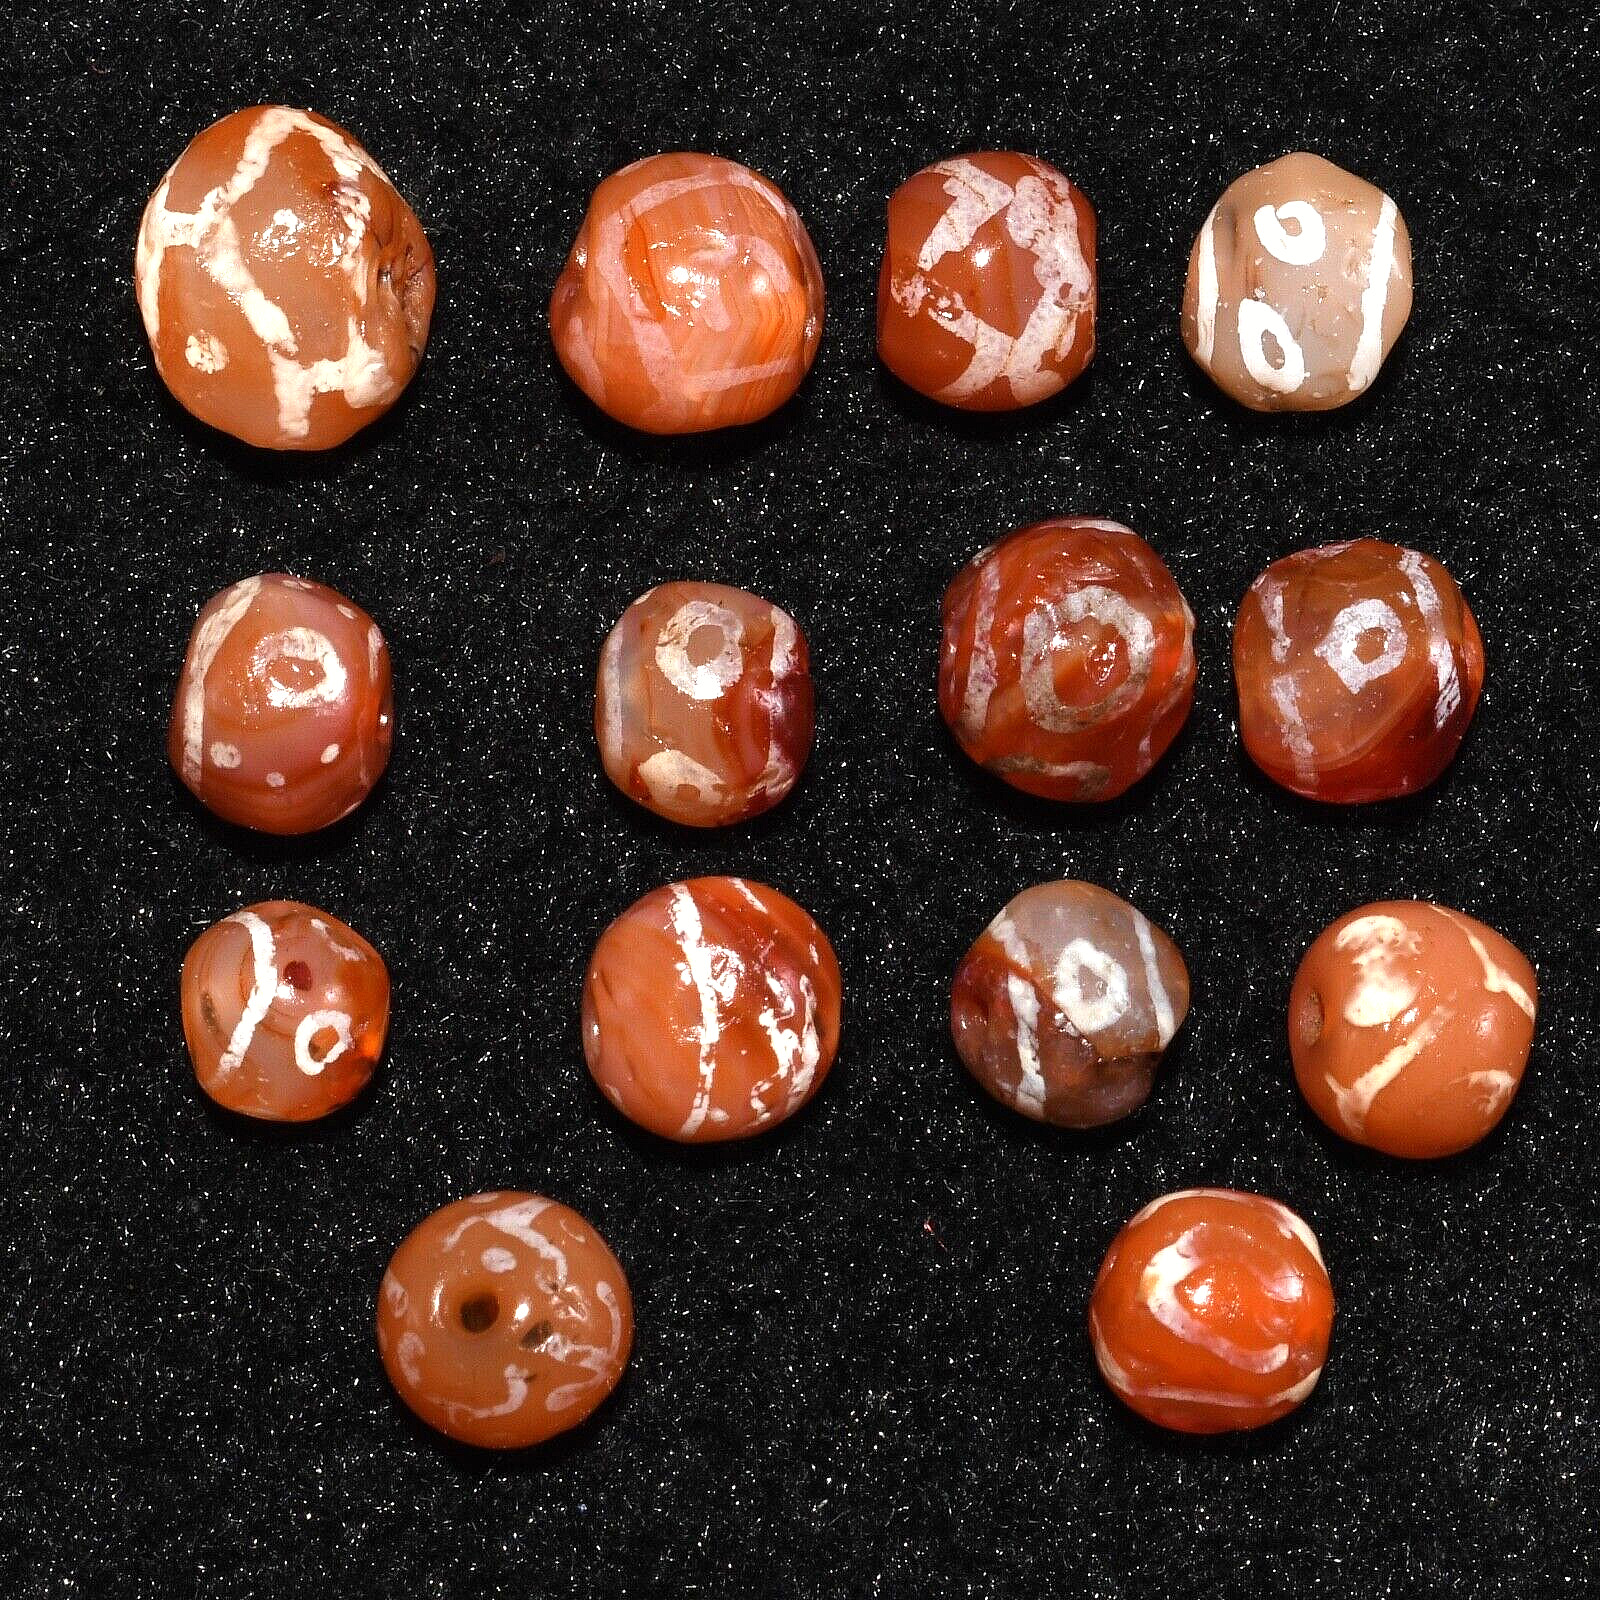 Authentic 15 Ancient Indus Valley Etched Round Carnelian Beads Ca. 2600-1700 BCE